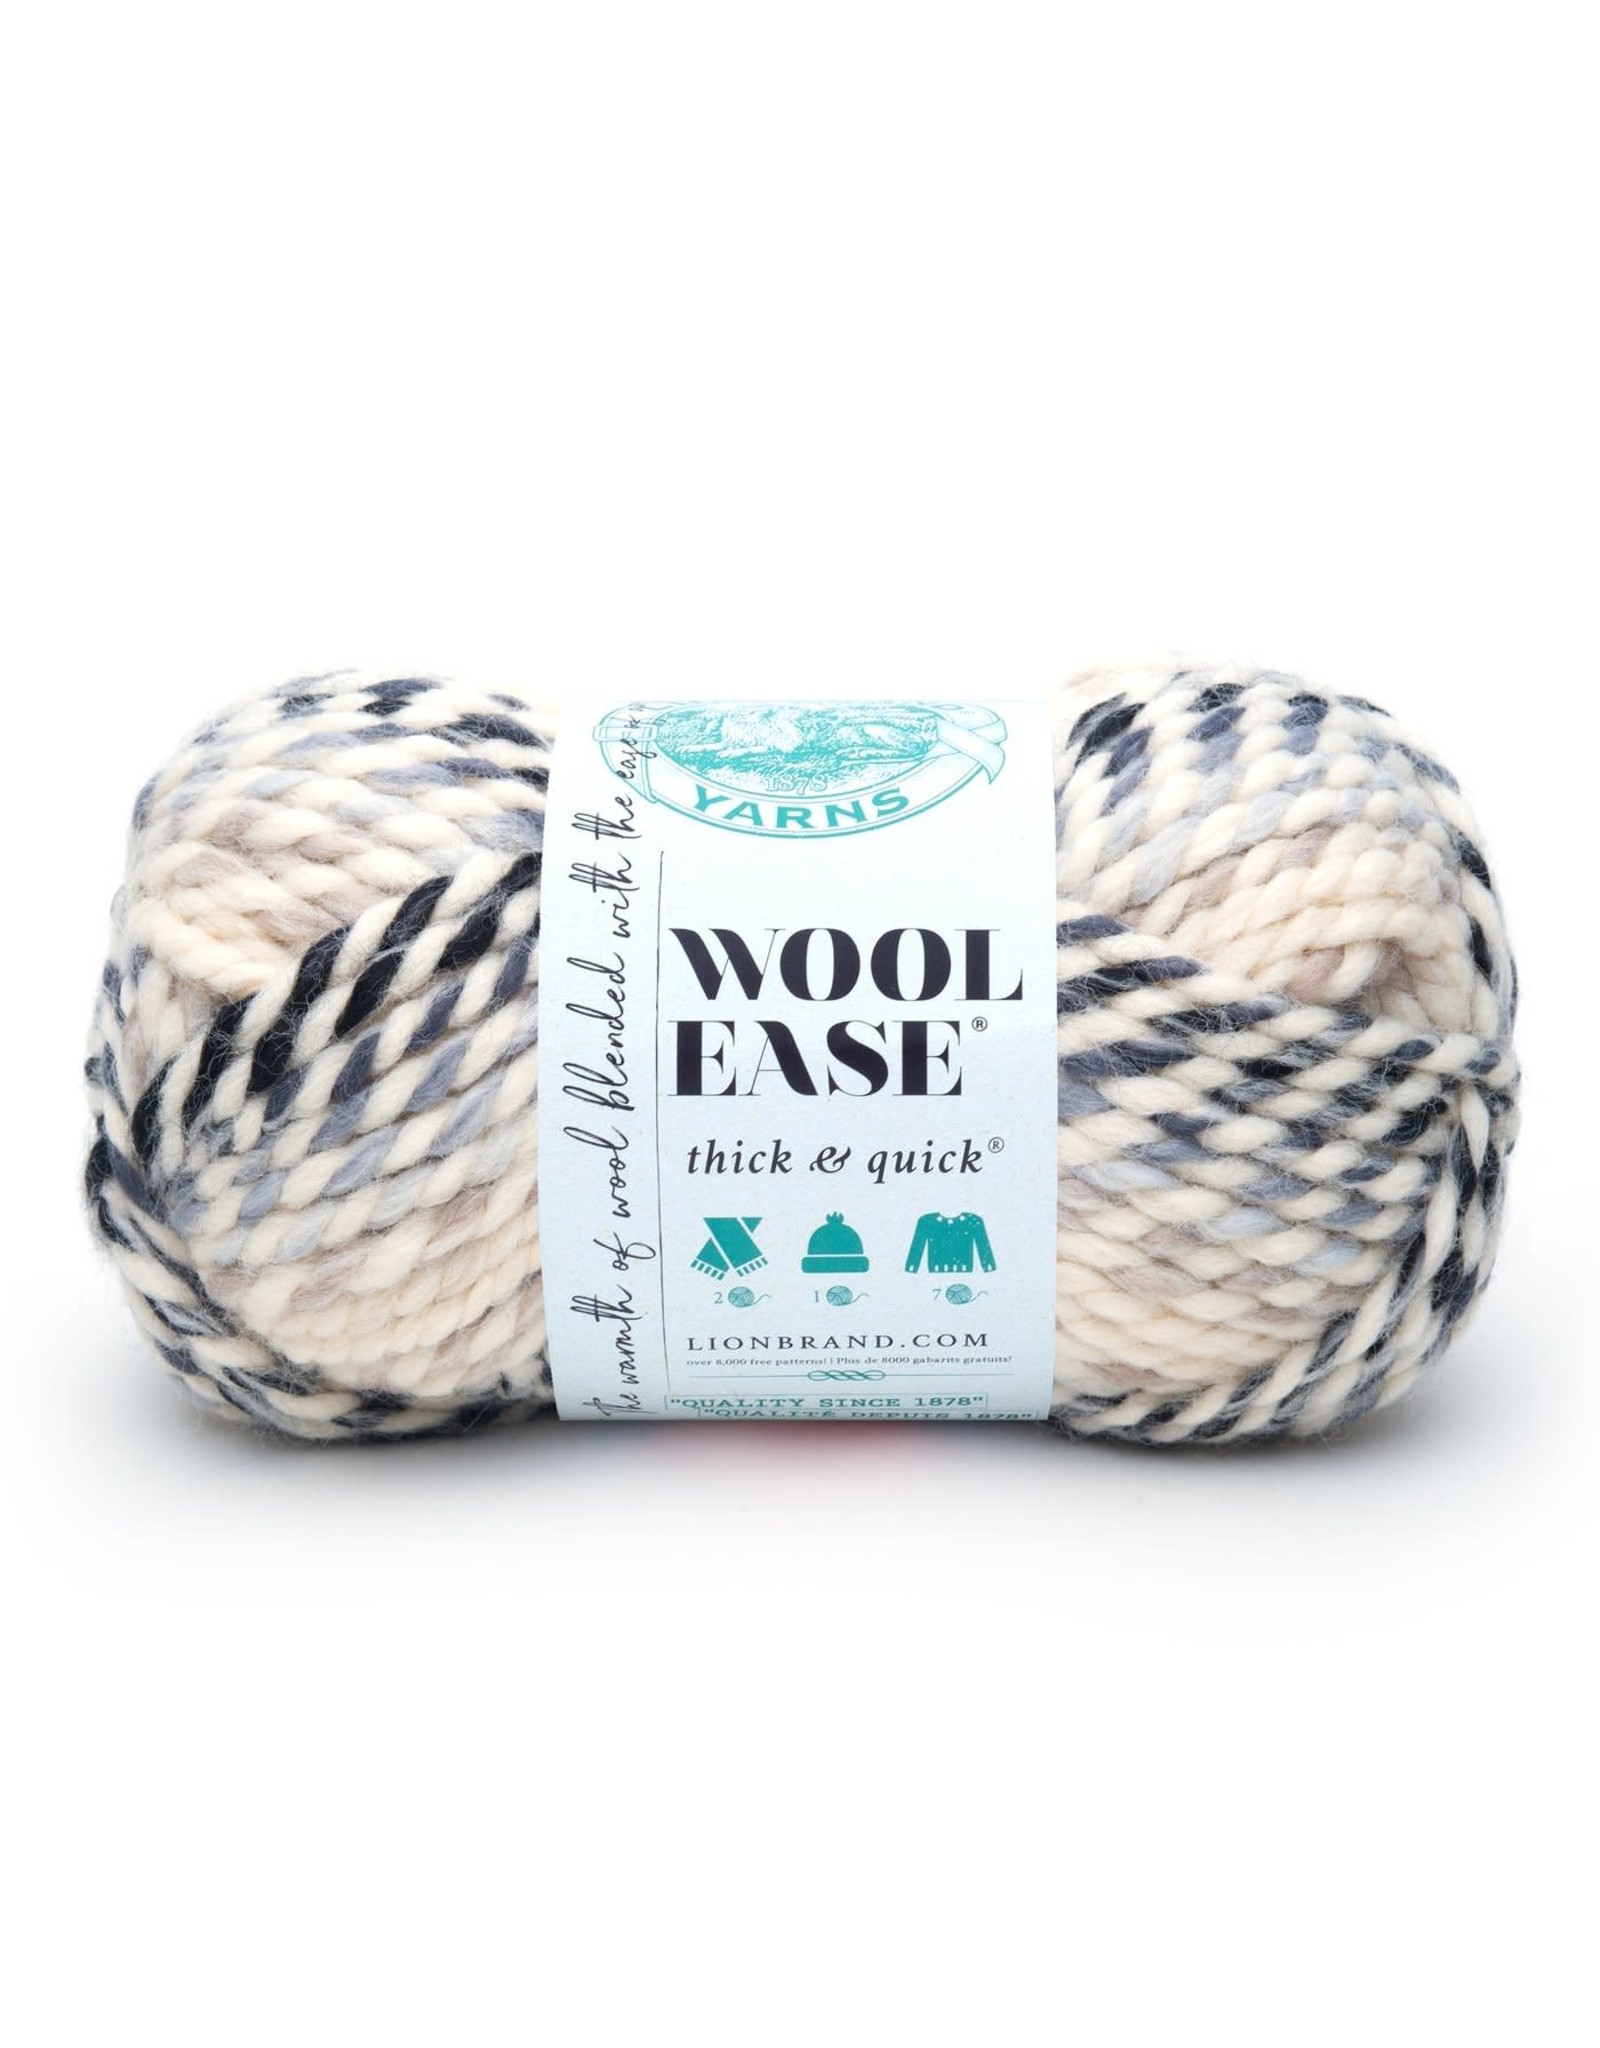 Moonlight - Wool Ease Thick and Quick - Lion Brand